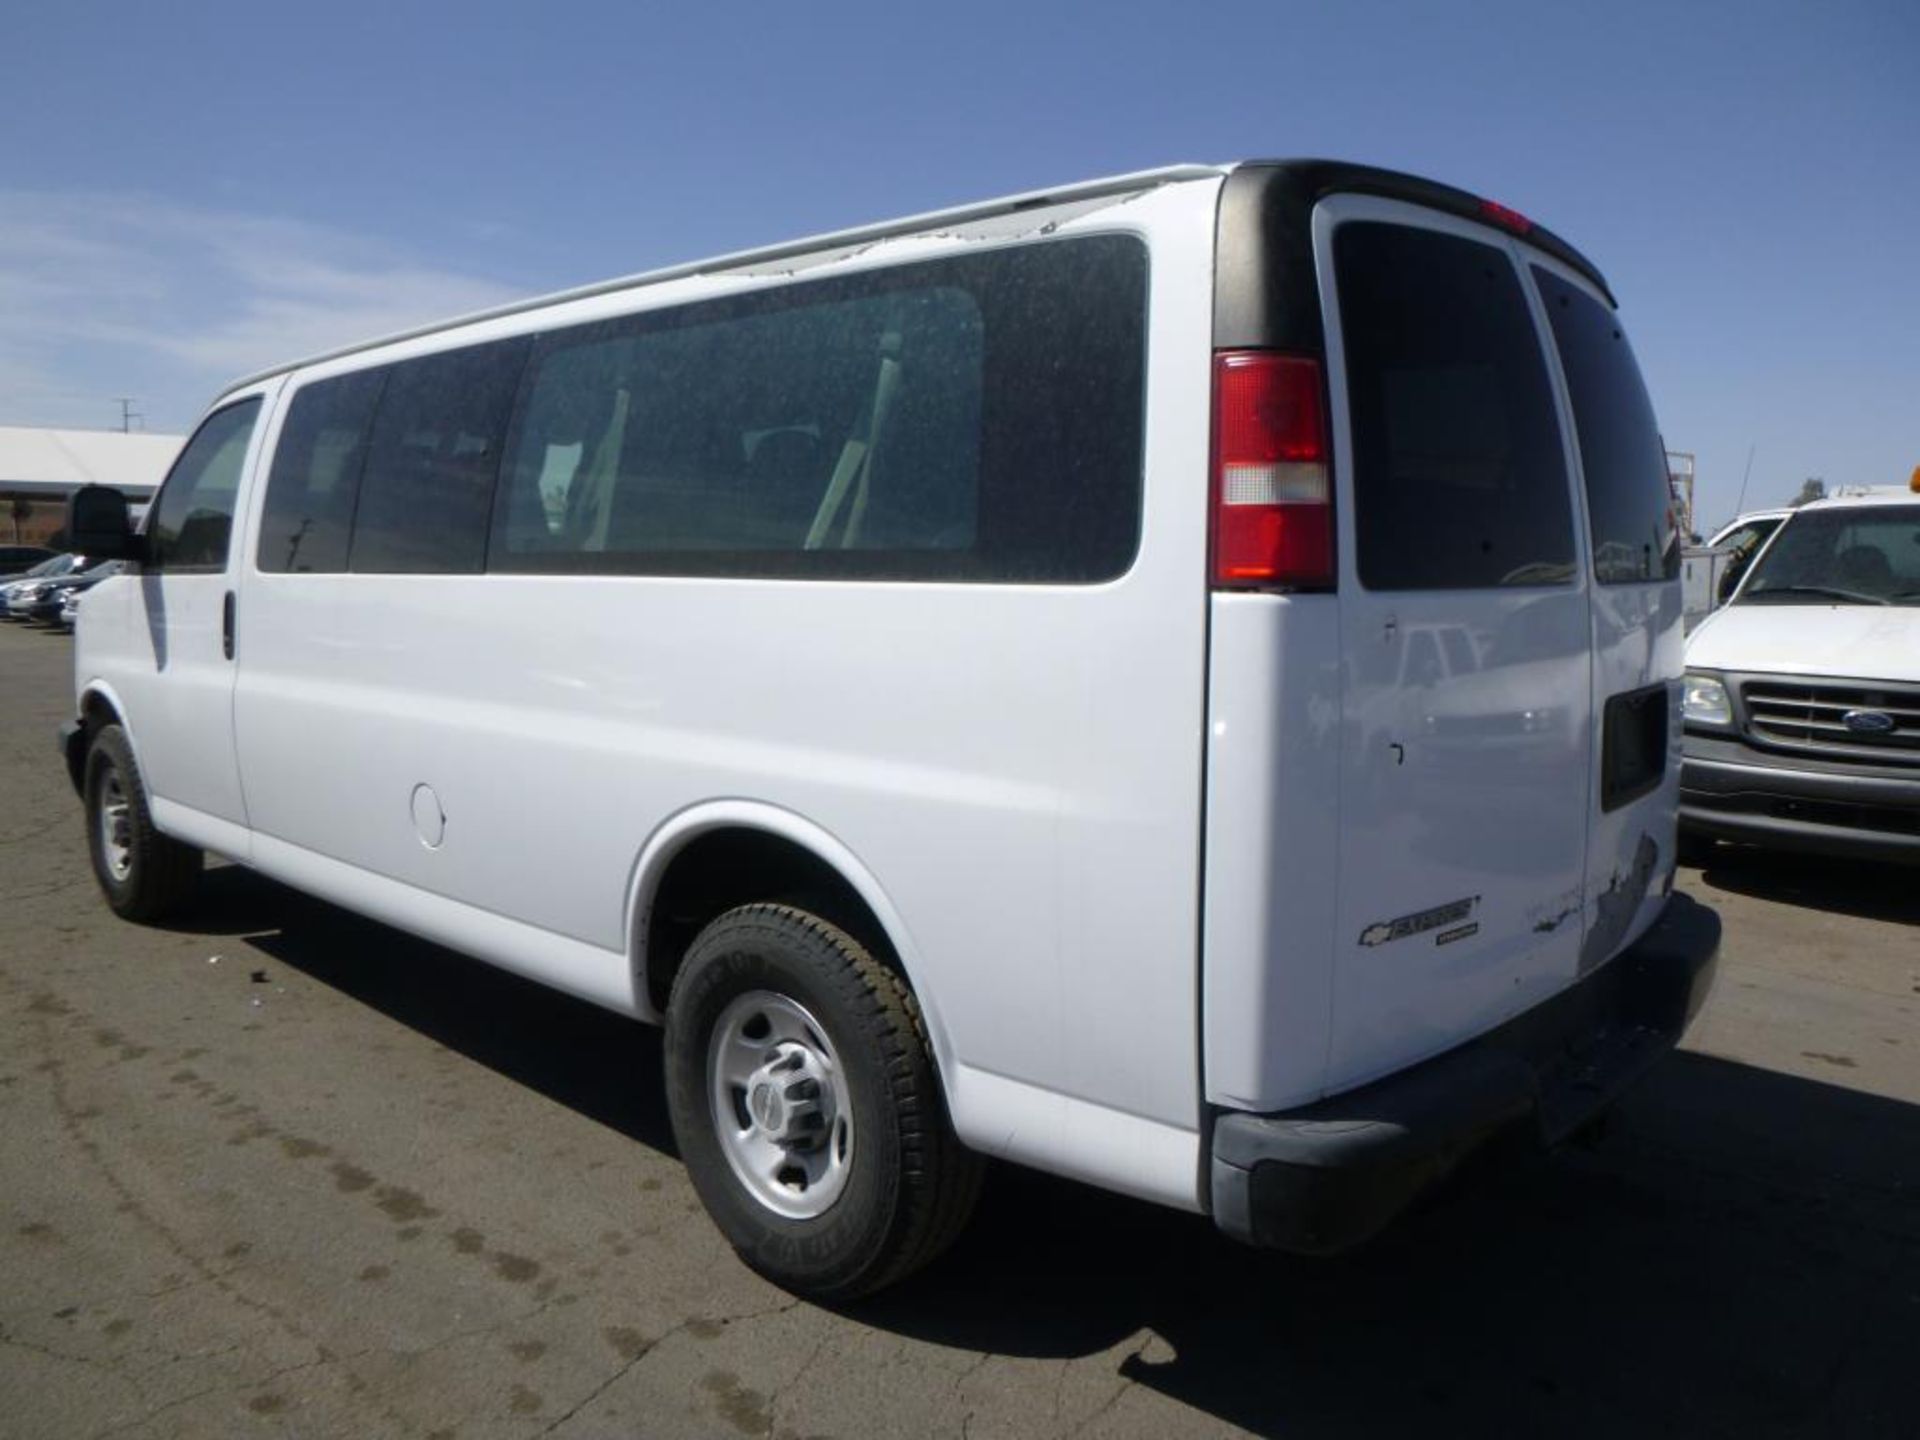 2008 Chevrolet Express - Image 2 of 14